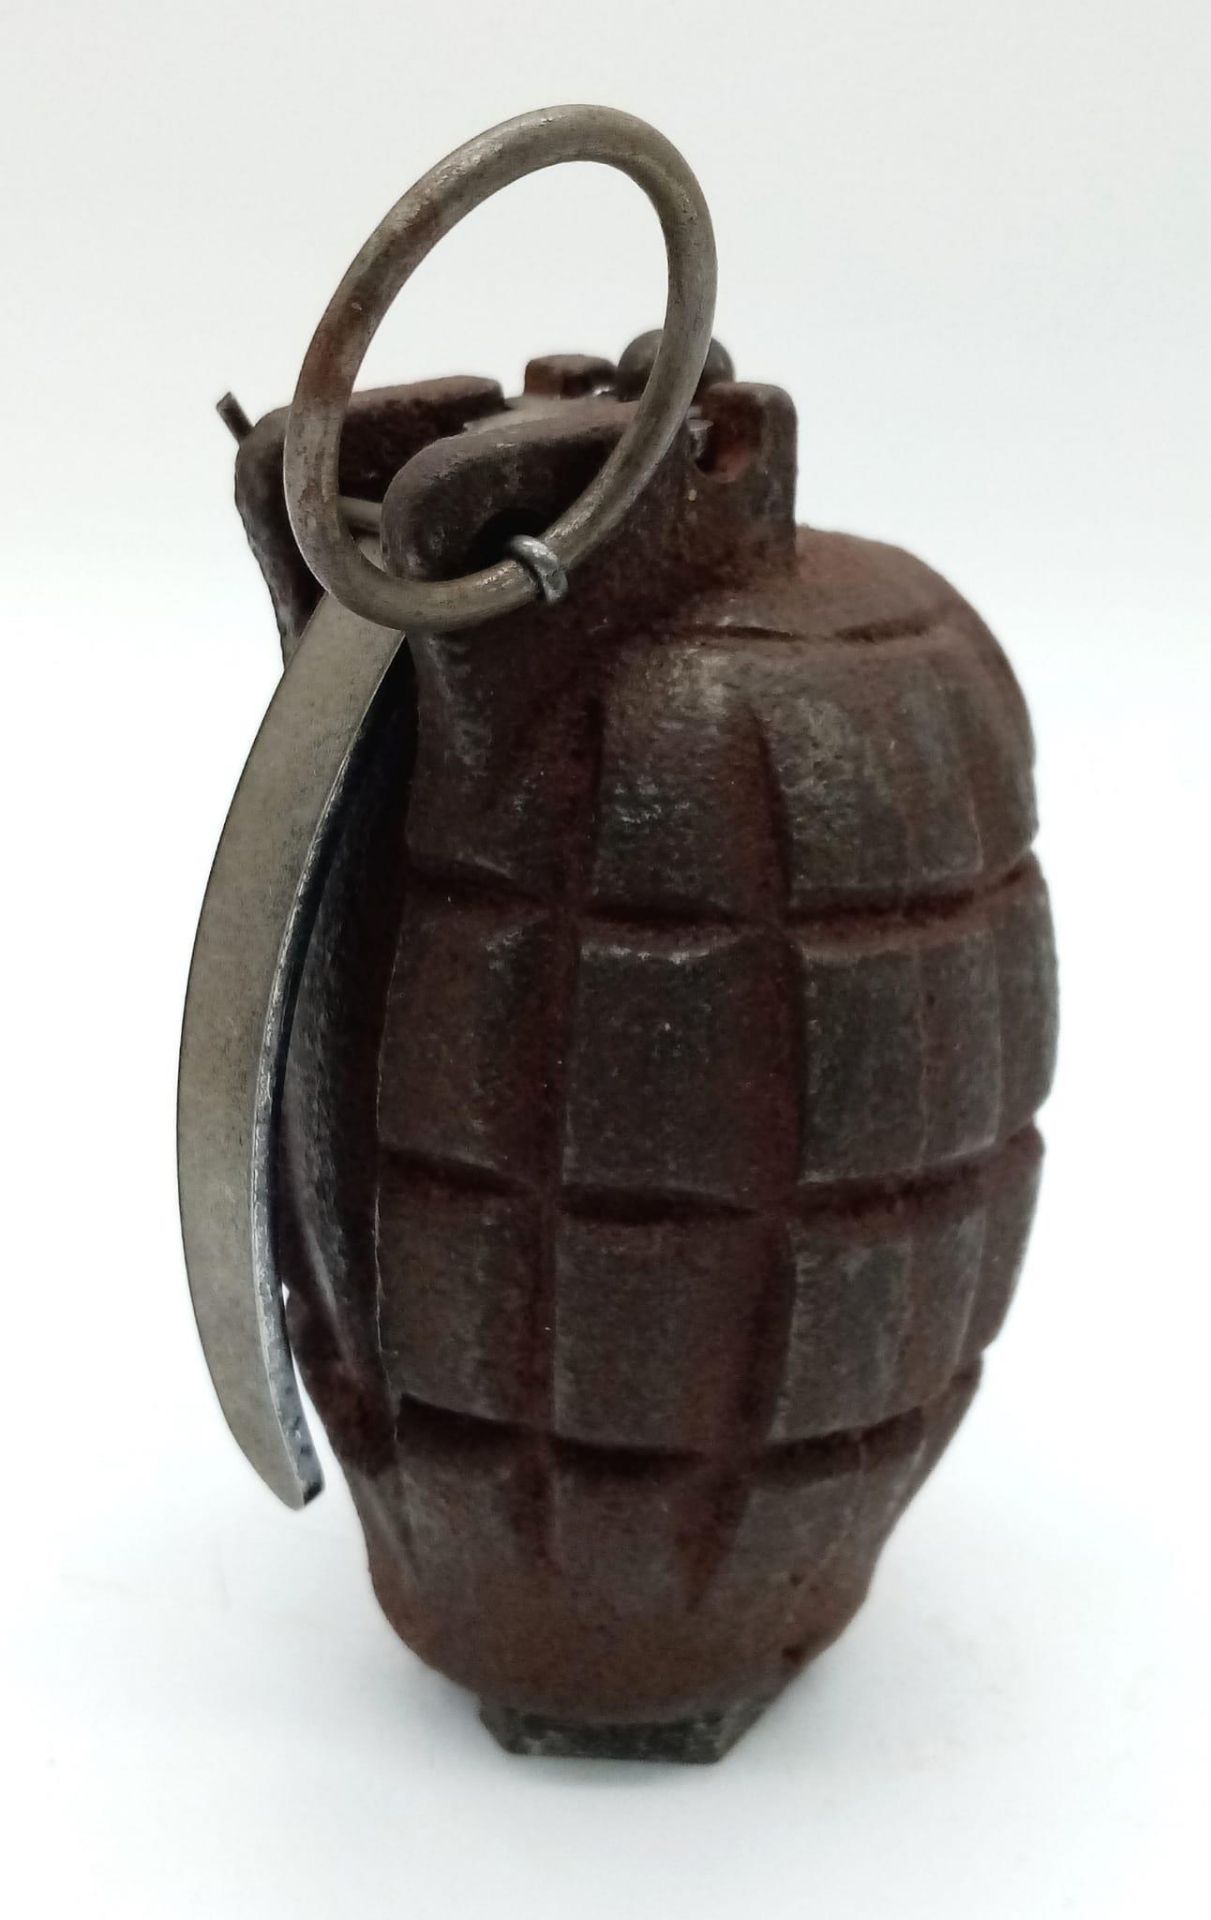 INERT Israeli No 36 Hand Grenade circa late 1940’a-erly 1950’s. UK Mainland Sales Only.